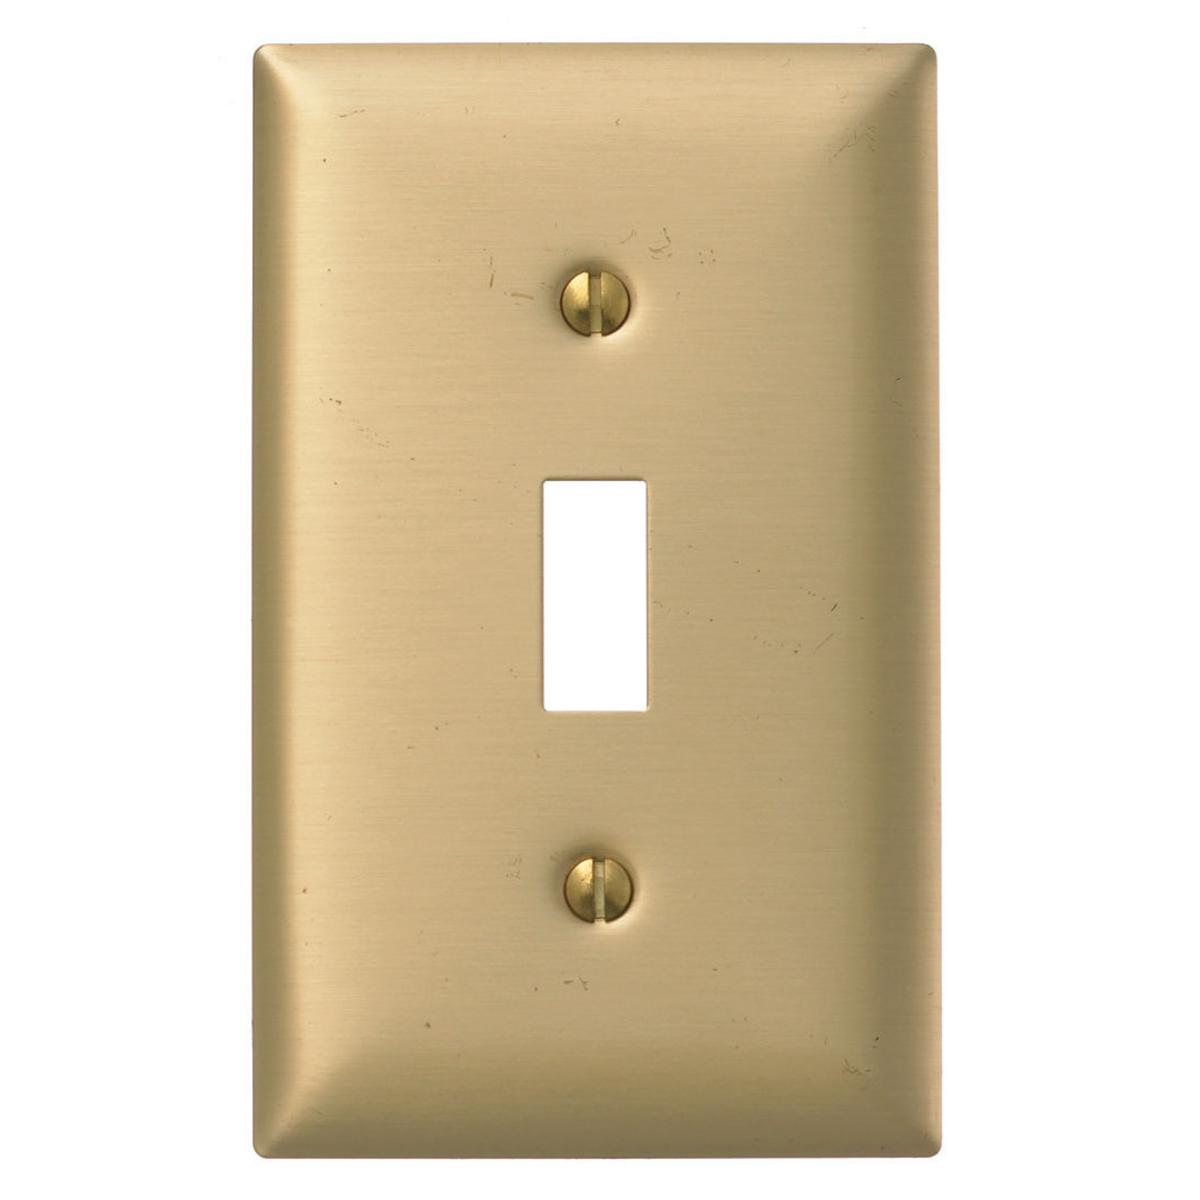 Hubbell SBP1 Wallplates and Boxes, Metallic Plates, 1- Gang, 1) Toggle Opening, Standard Size, Brass Plated Steel  ; Non-magnetic and corrosion resistant ; Finish is lacquer coated to inhibit oxidation ; Protective plastic film helps to prevent scratches and damage ; 